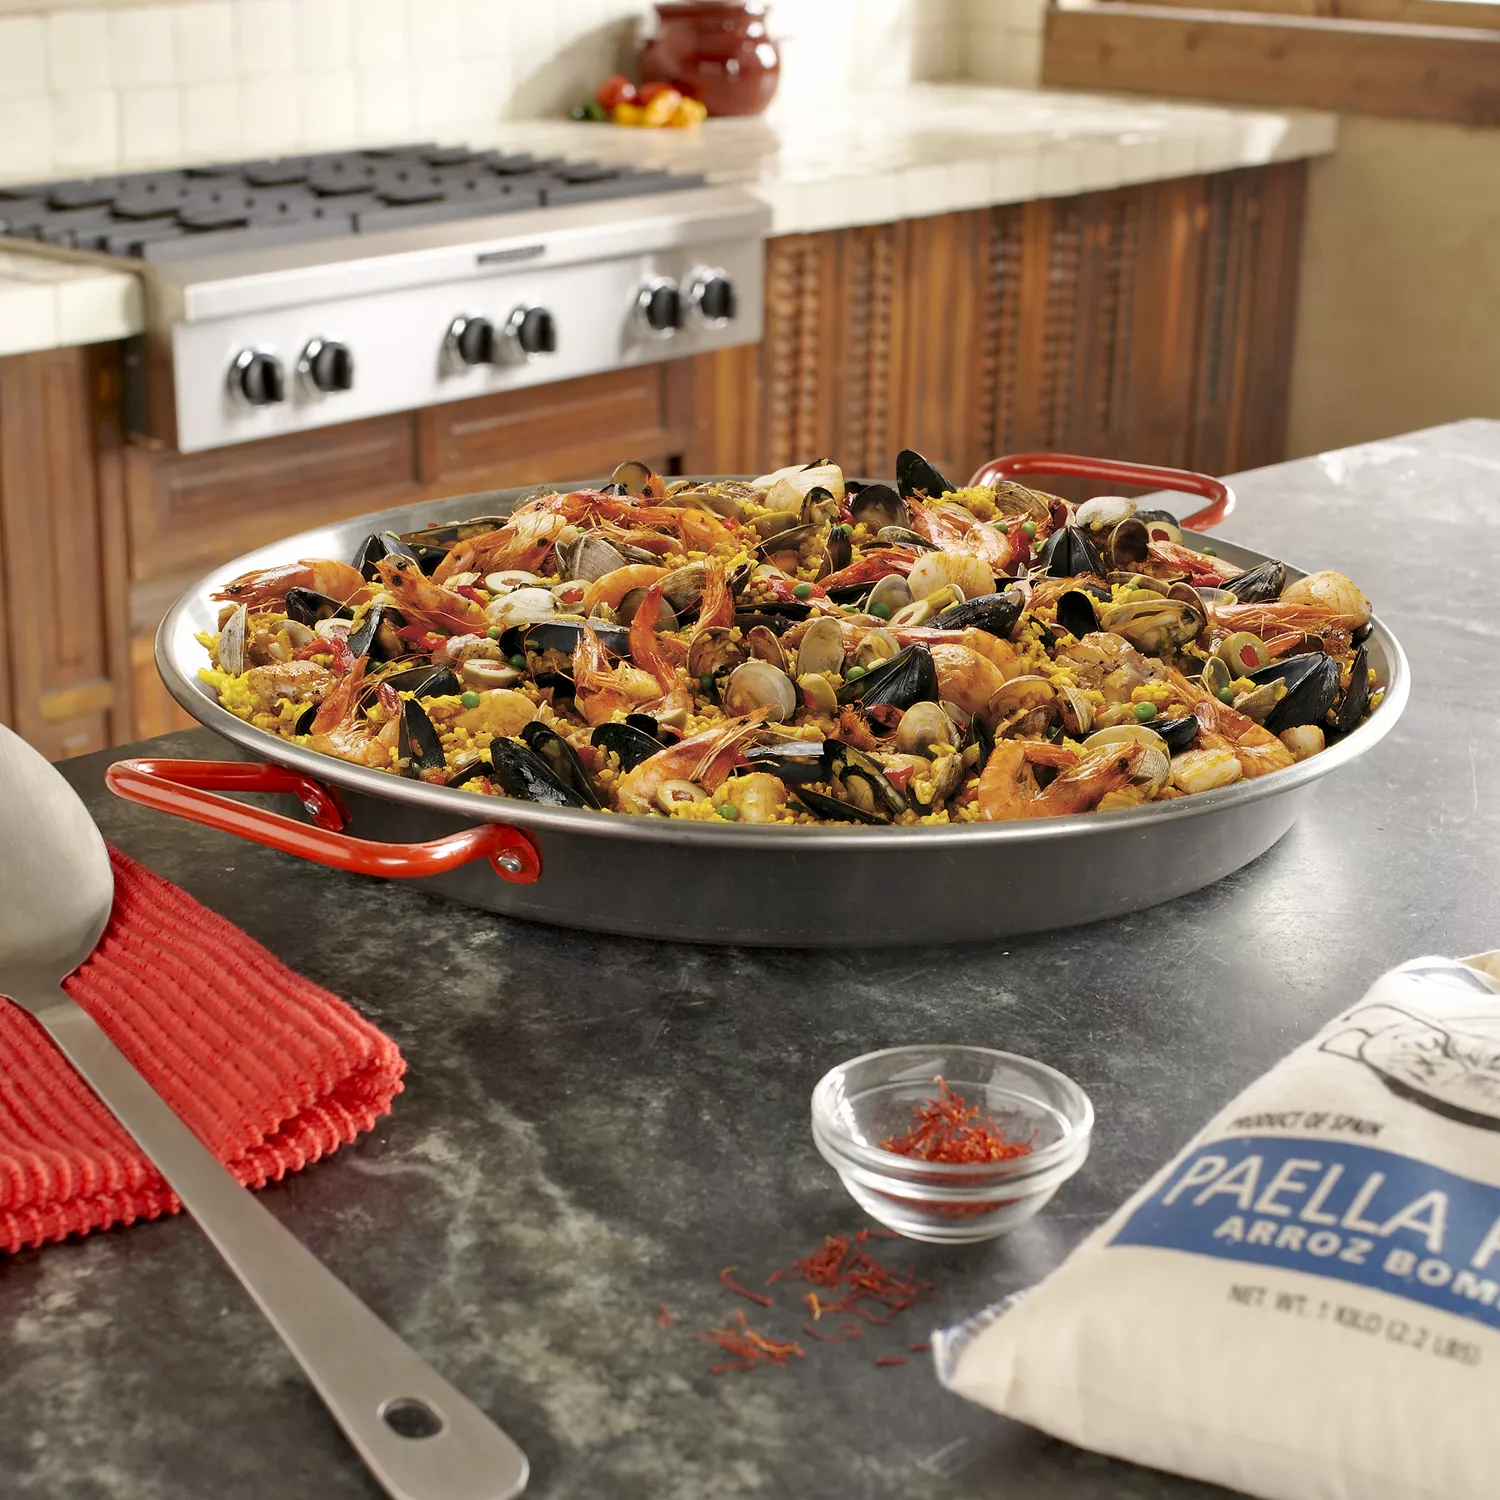 Paella Pan Gift set - Includes Pan, Ingredients and Spoon